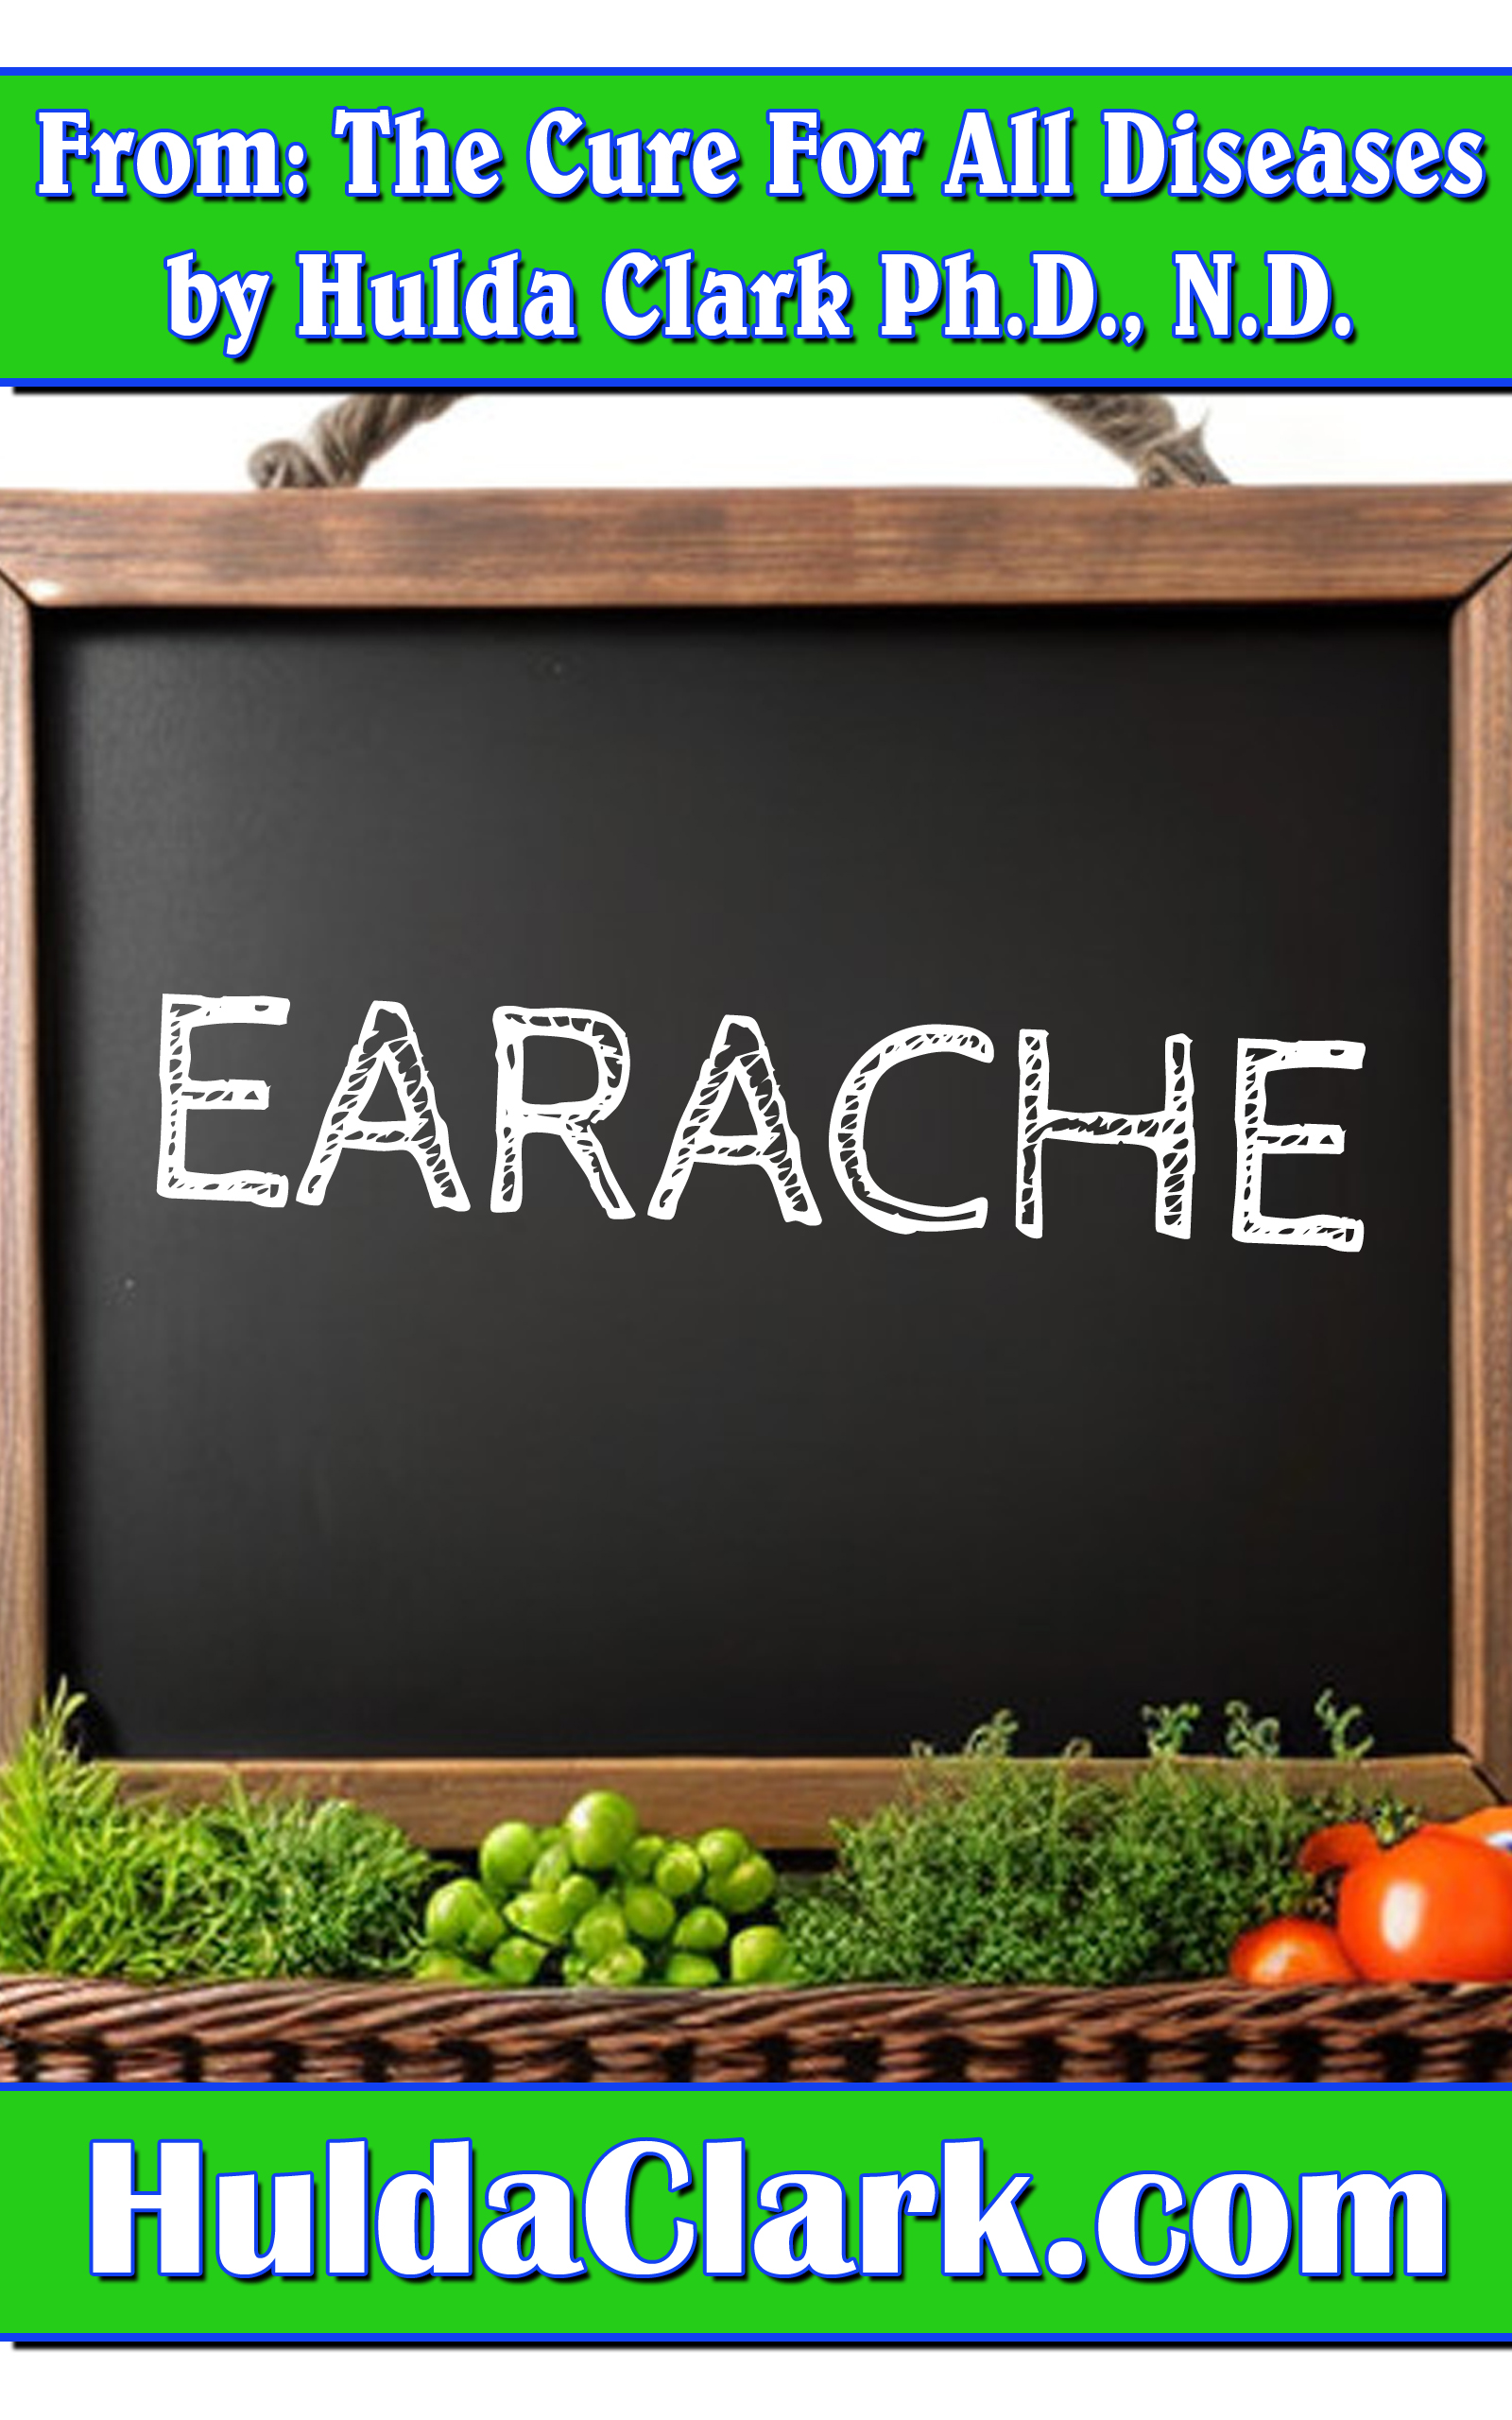 Earache Ebook excerpt from The Cure for All Diseases by Hulda Clark